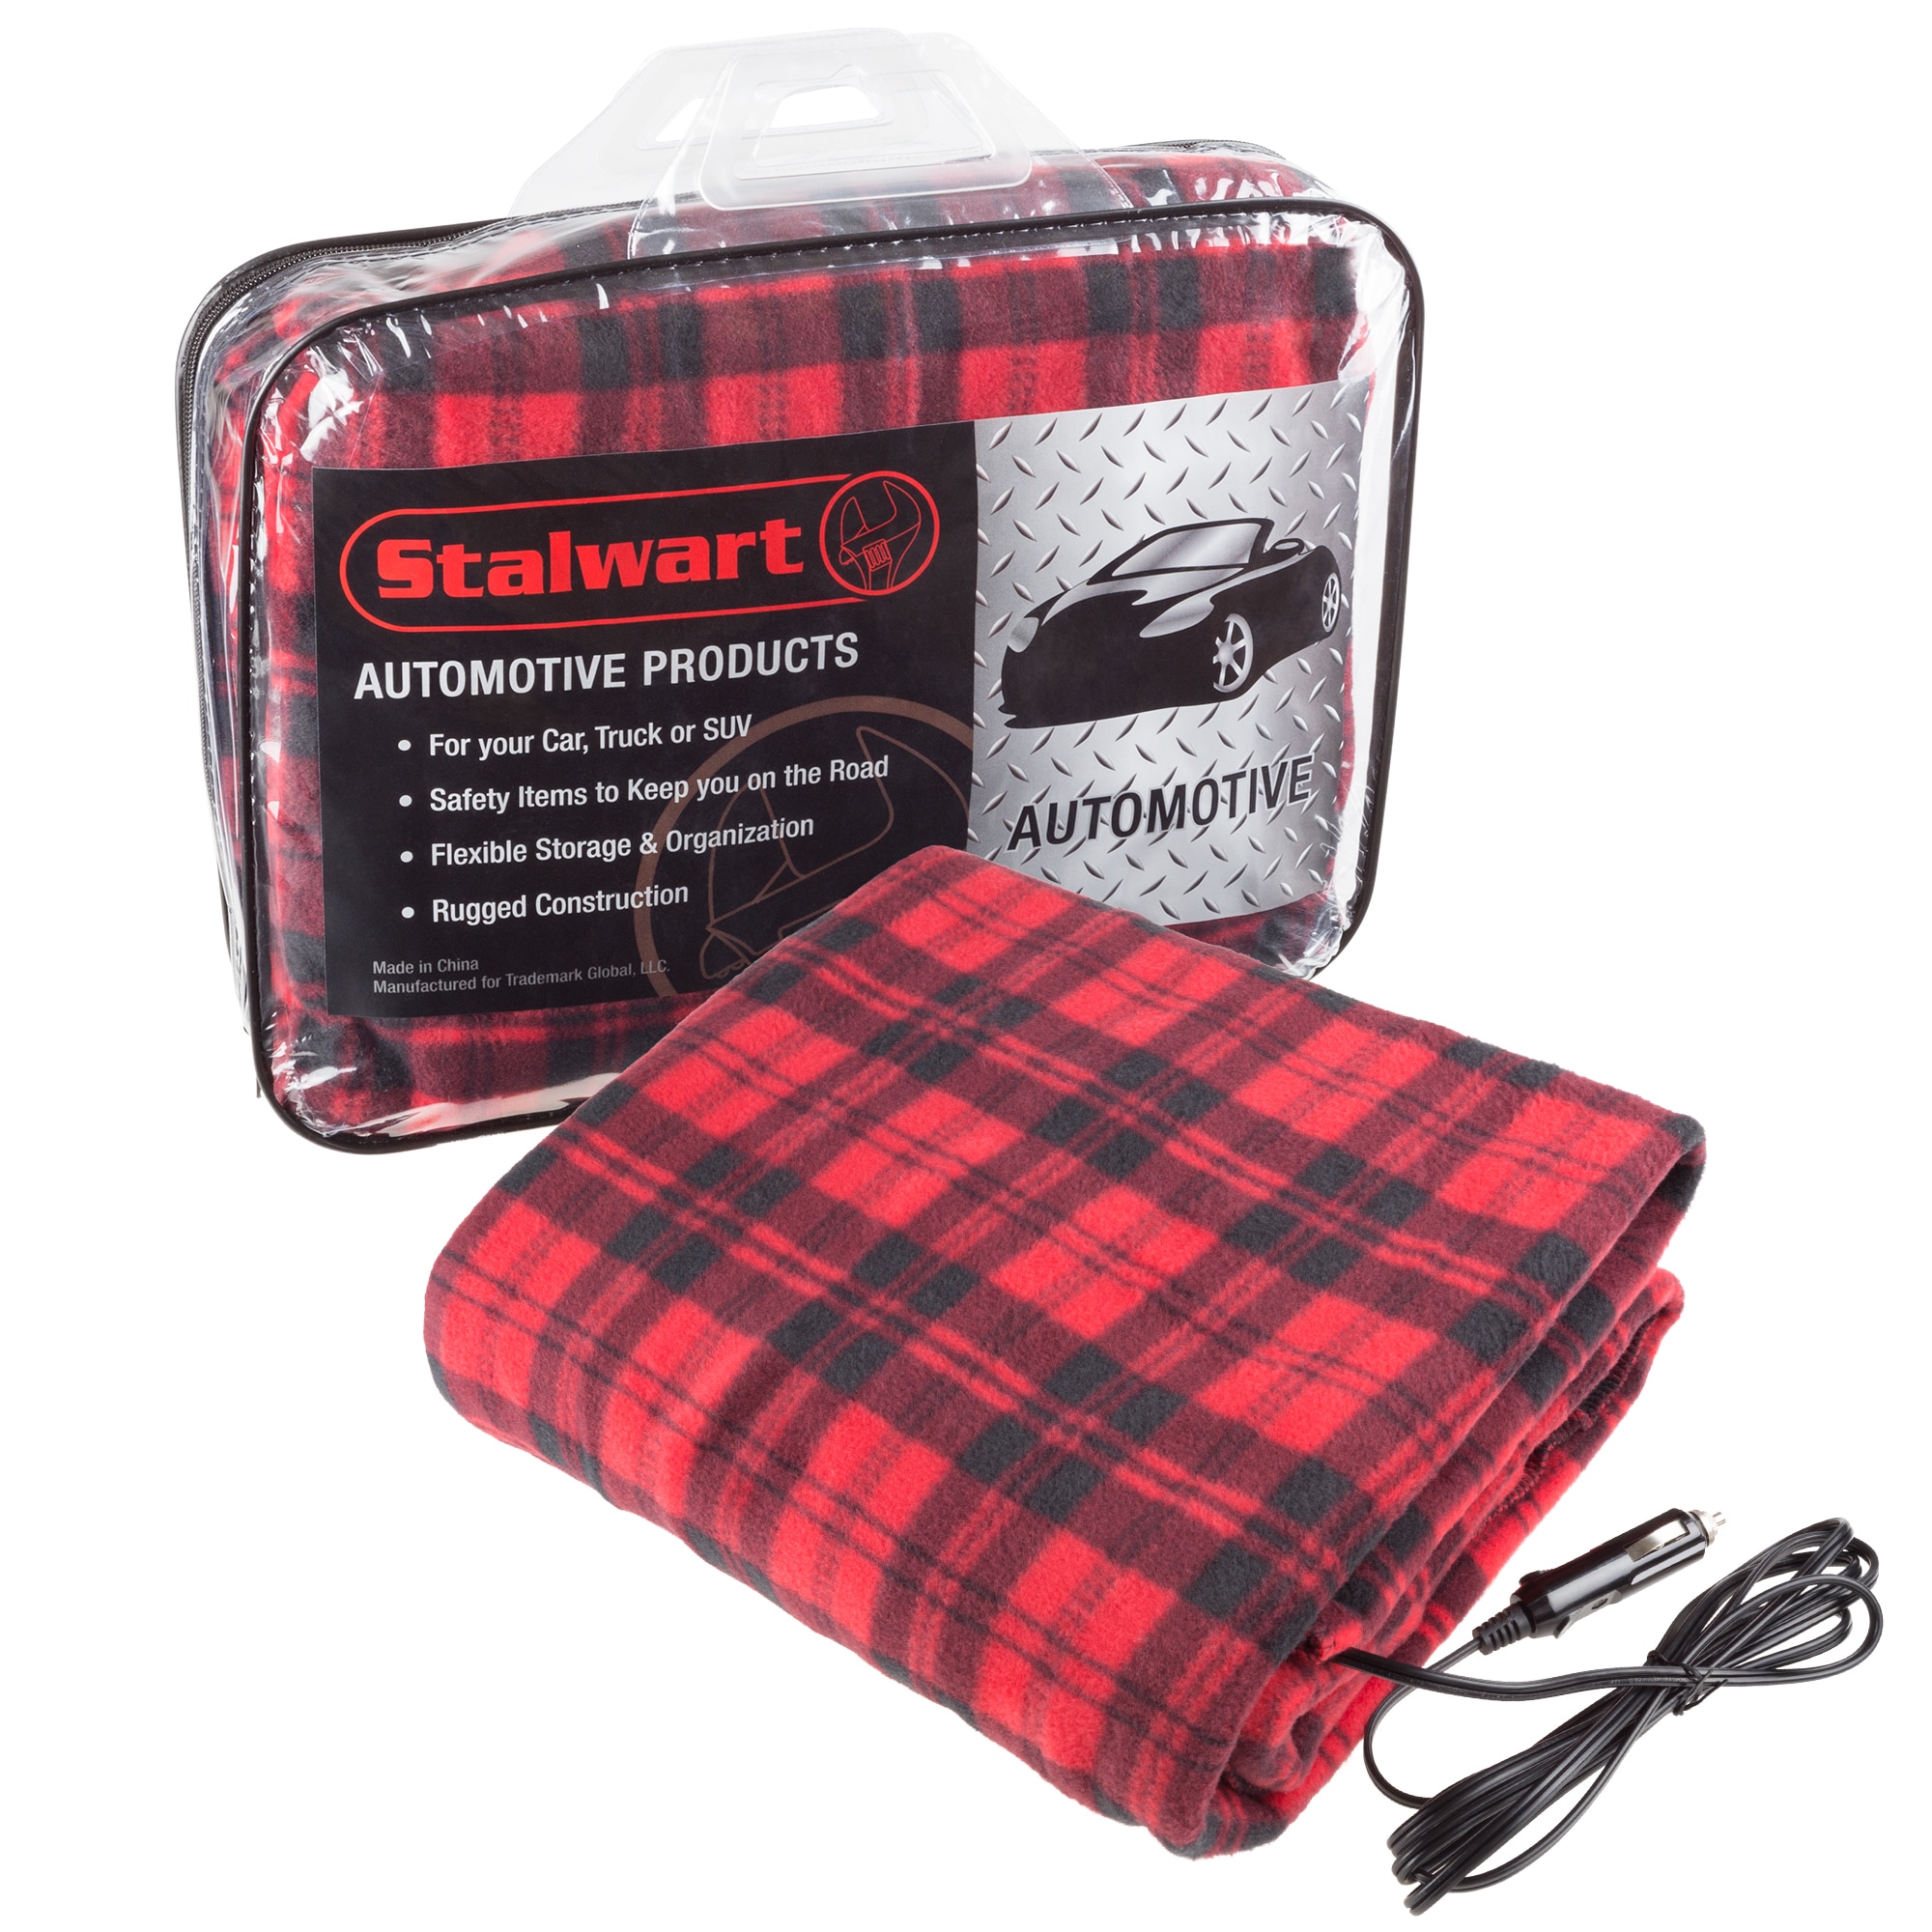 https://ak1.ostkcdn.com/images/products/14101568/Stalwart-12-Volt-Red-Plaid-Electric-Blanket-for-Automobile-a3229e30-5b75-4c84-9850-397fd0161a46.jpg